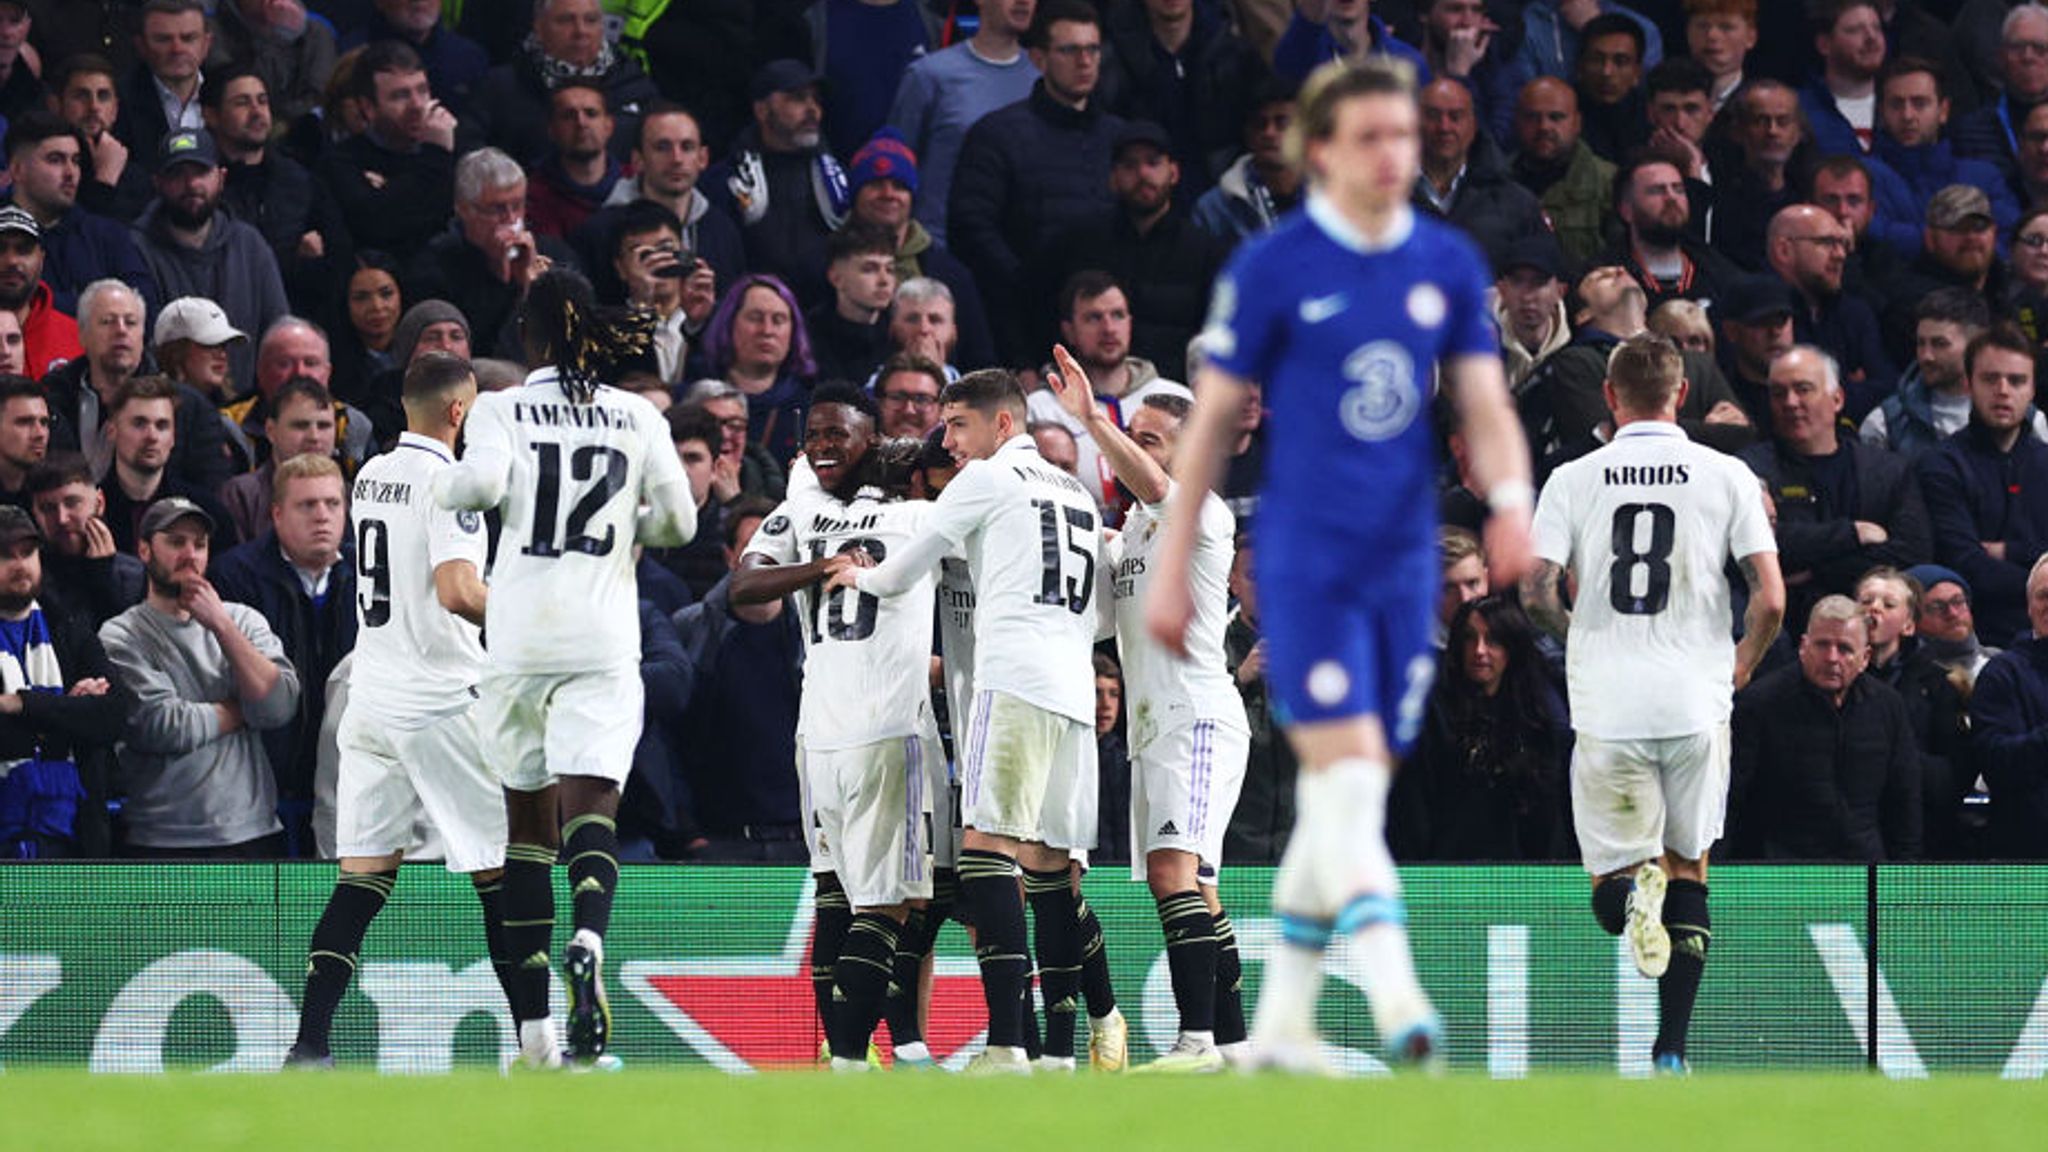 Chelsea 0-2 Real Madrid (agg 0-4) Rodrygo scores twice as Blues outclassed by holders in Champions League quarter-final Football News Sky Sports